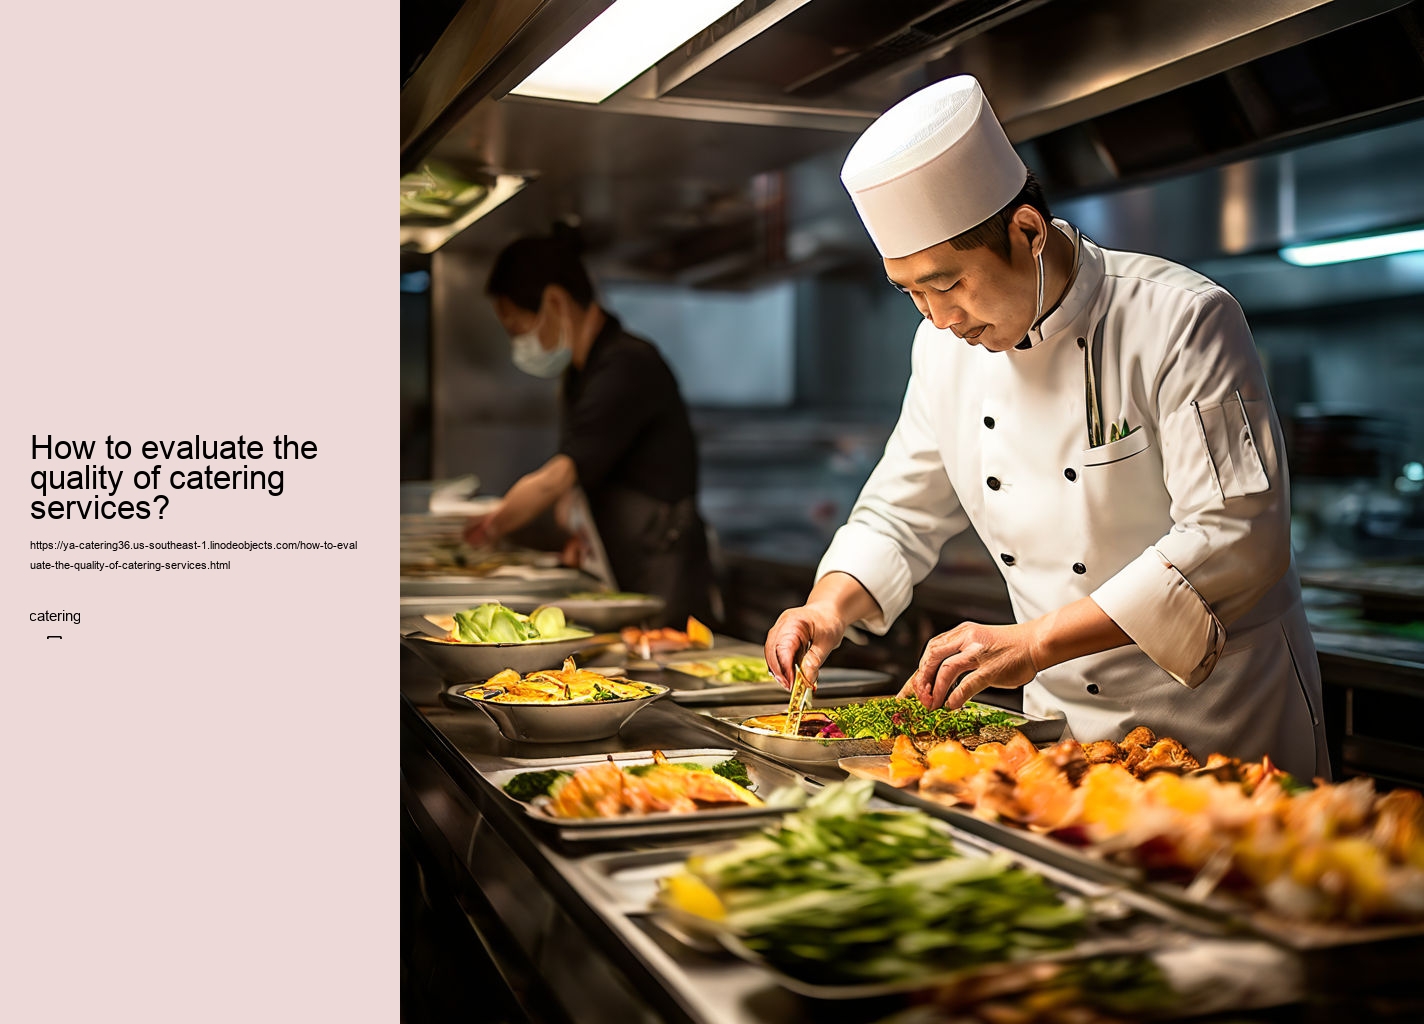 How to evaluate the quality of catering services?